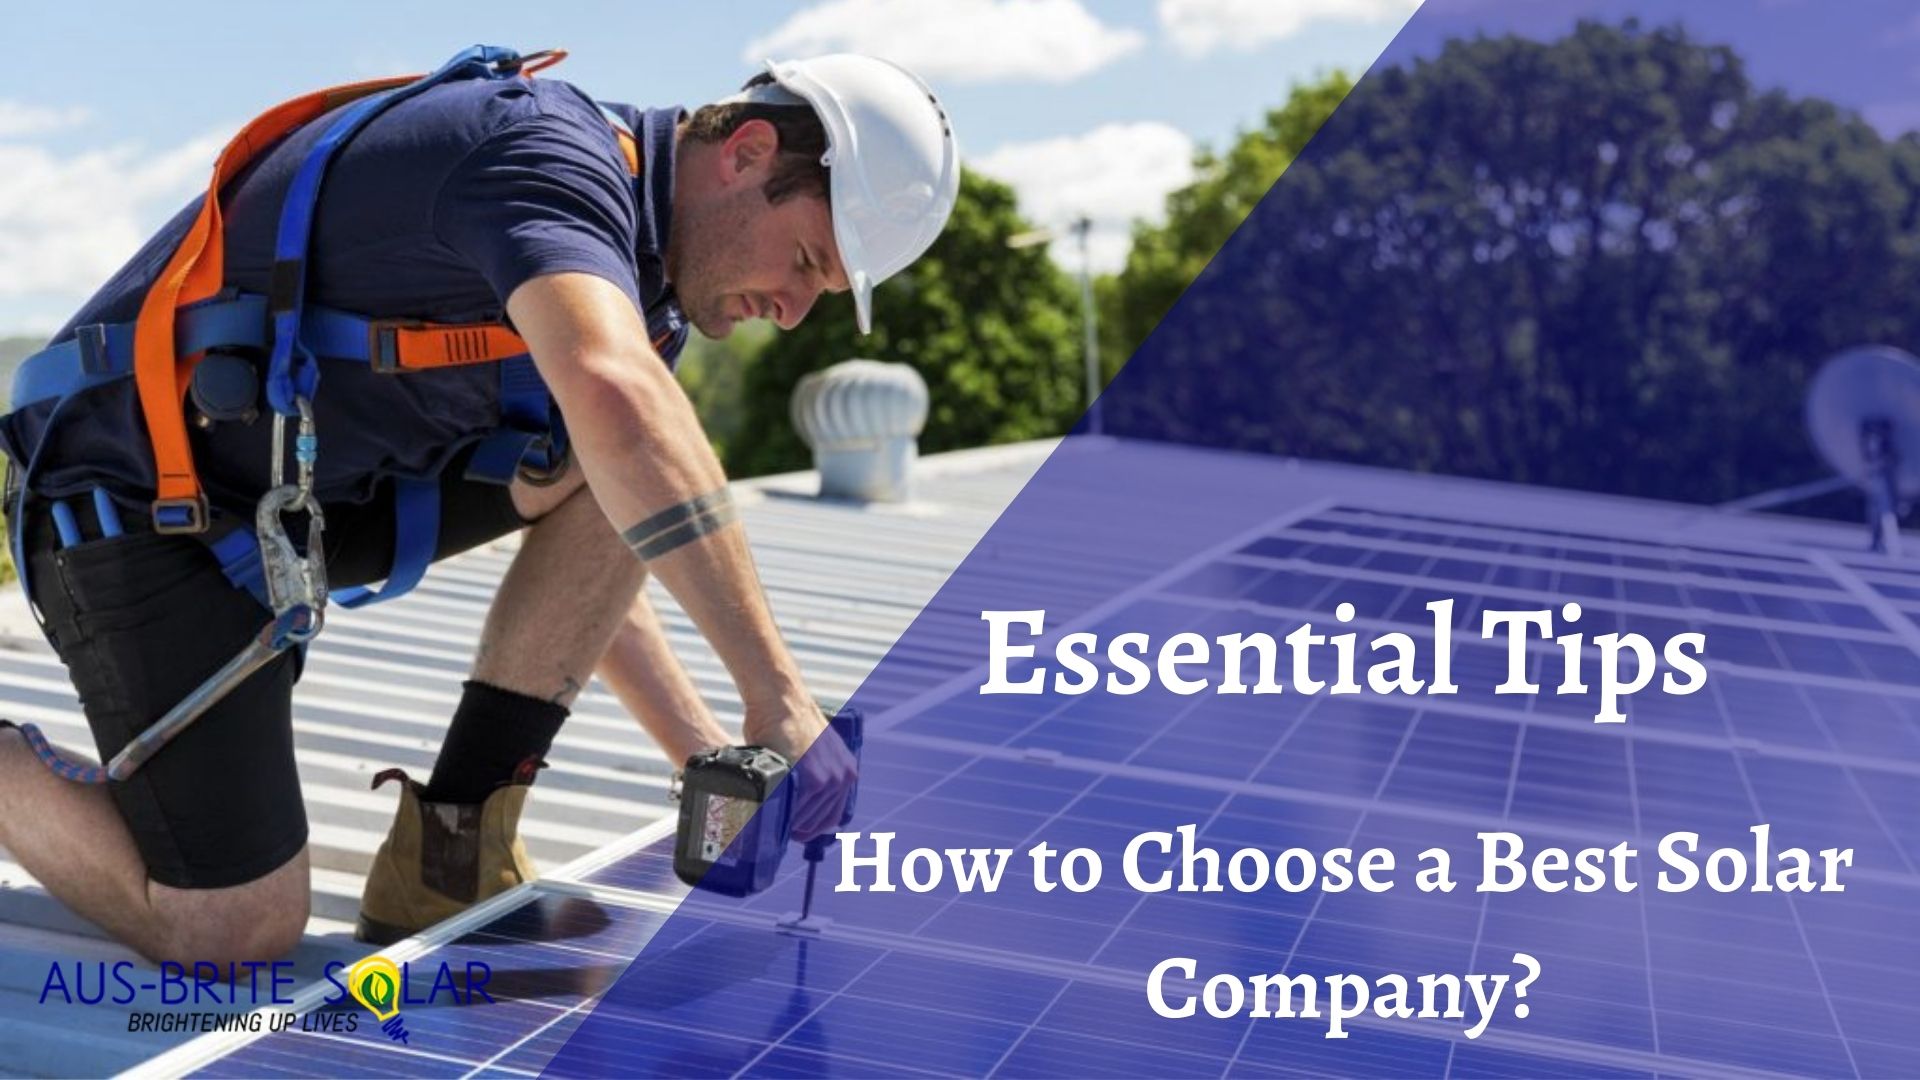 public/uploads/2021/10/Essential-Tips-How-to-Choose-a-Best-Solar-Company.jpg